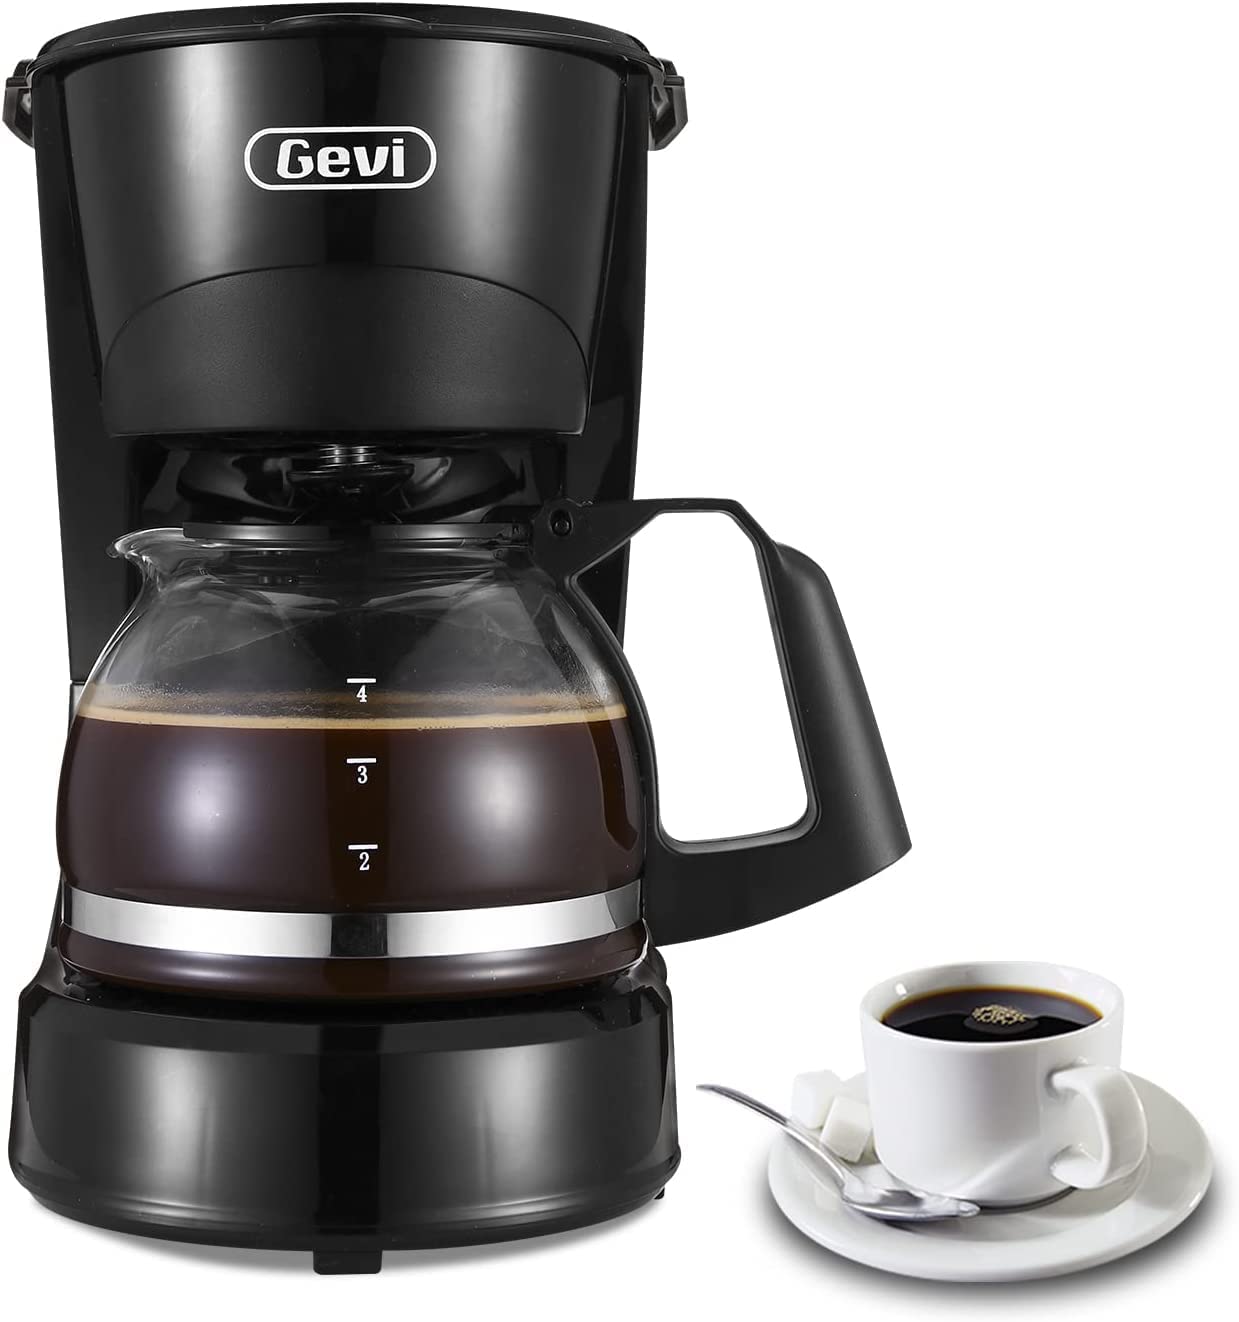 Gevi 4-Cup Coffee Maker with Auto-Shut Off, Small Drip Coffeemaker Compact  Coffee Pot Brewer Machine with Cone Filter, Glass Carafe and Hot Plate